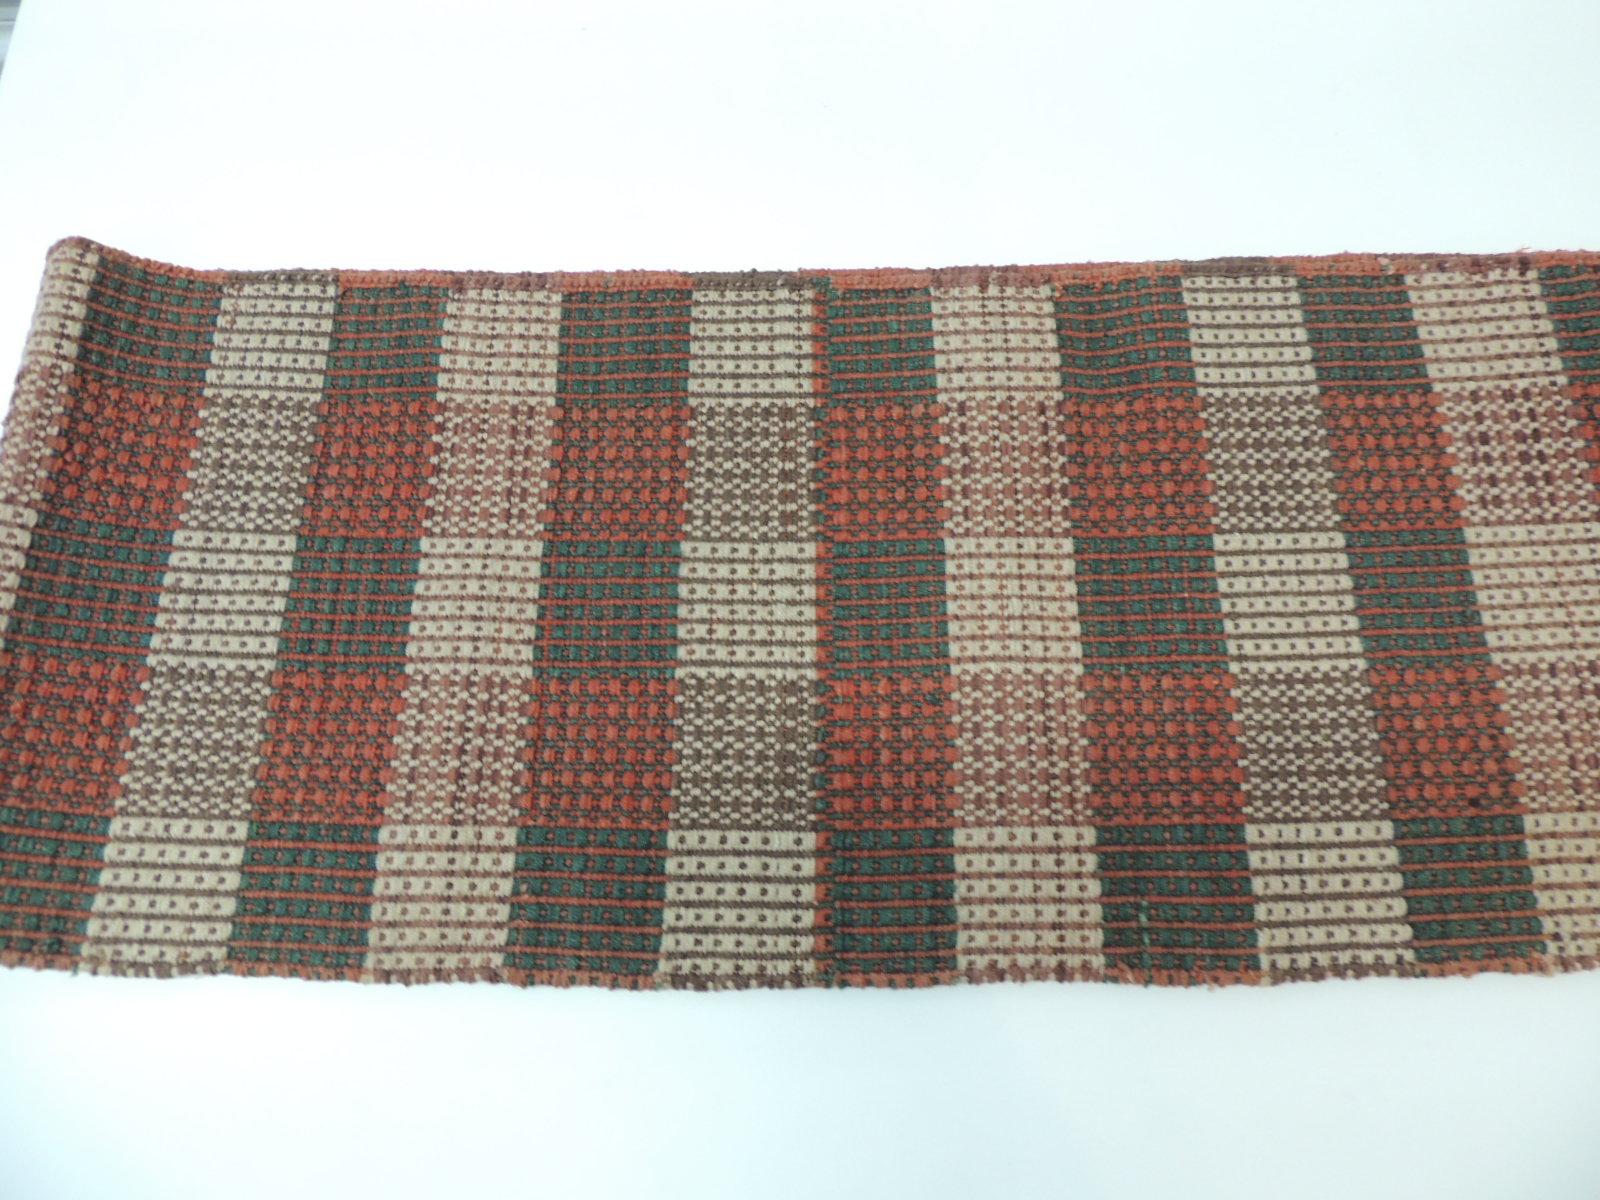 Orange and green woven table runner with small handknotted fringes.
Size: 12.5